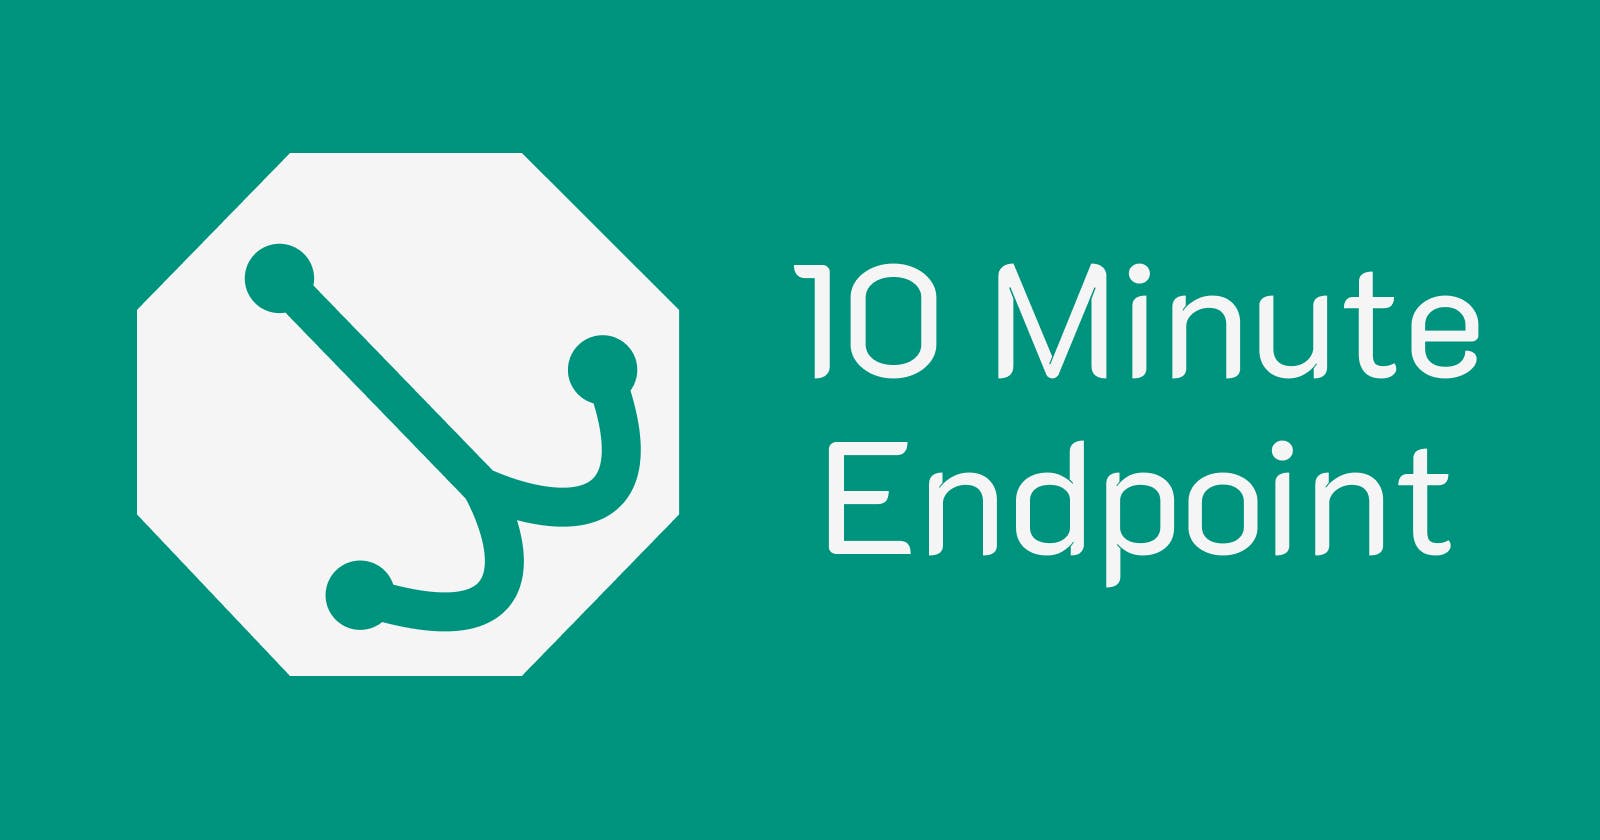 Introducing 10 Minute Endpoint: Webhook Testing Made Easy